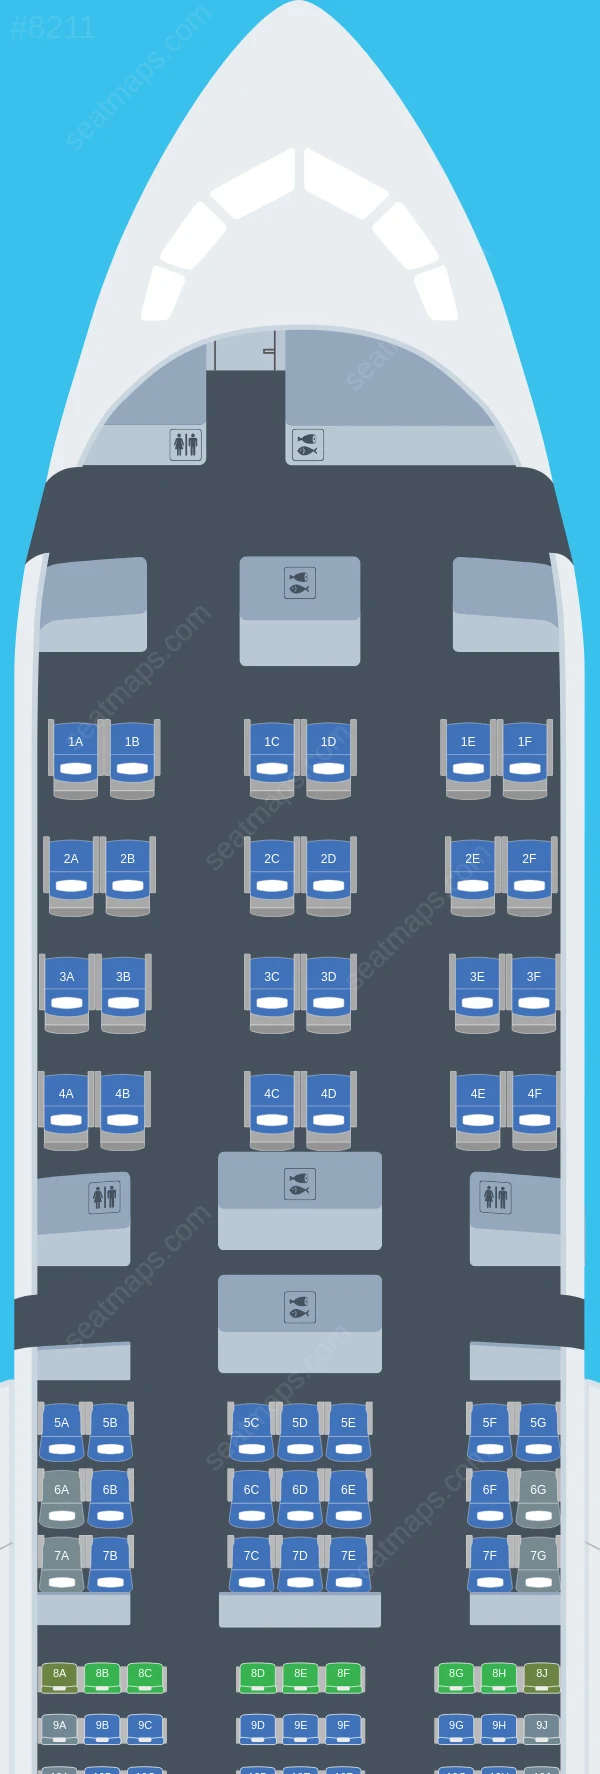 LOT Polish Airlines Boeing 787-9 seatmap preview